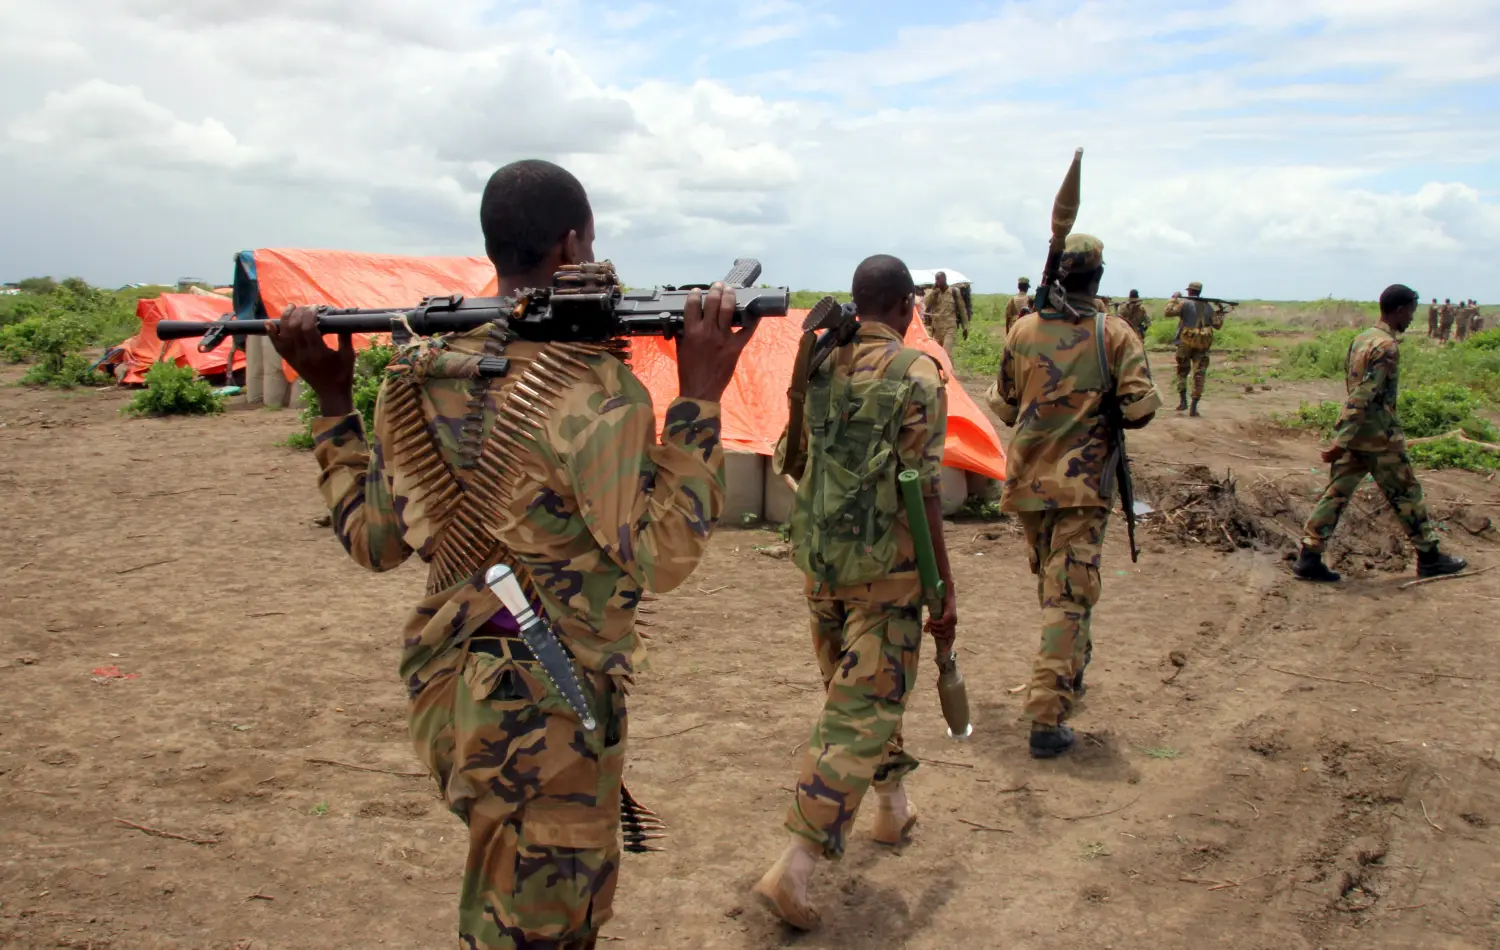 Jubbaland forces carry their ammunitions during a security patrol against Islamist al Shabaab militants in Bulagaduud town, north of Kismayu, Somalia, August 17, 2015. Ahmed Madobe, a former Islamist warlord won re-election on Saturday as president of Somalia's southern region of Jubbaland, a territory partly controlled by al Shabaab militants and at odds with the central government of the Horn of Africa country. The fate of Kismayu and Jubbaland is seen as a test of the central government's skill in building a federal system and pacifying a nation fought over for more than two decades by warlords and Islamist rebels. REUTERS/Abdiqani Hassan